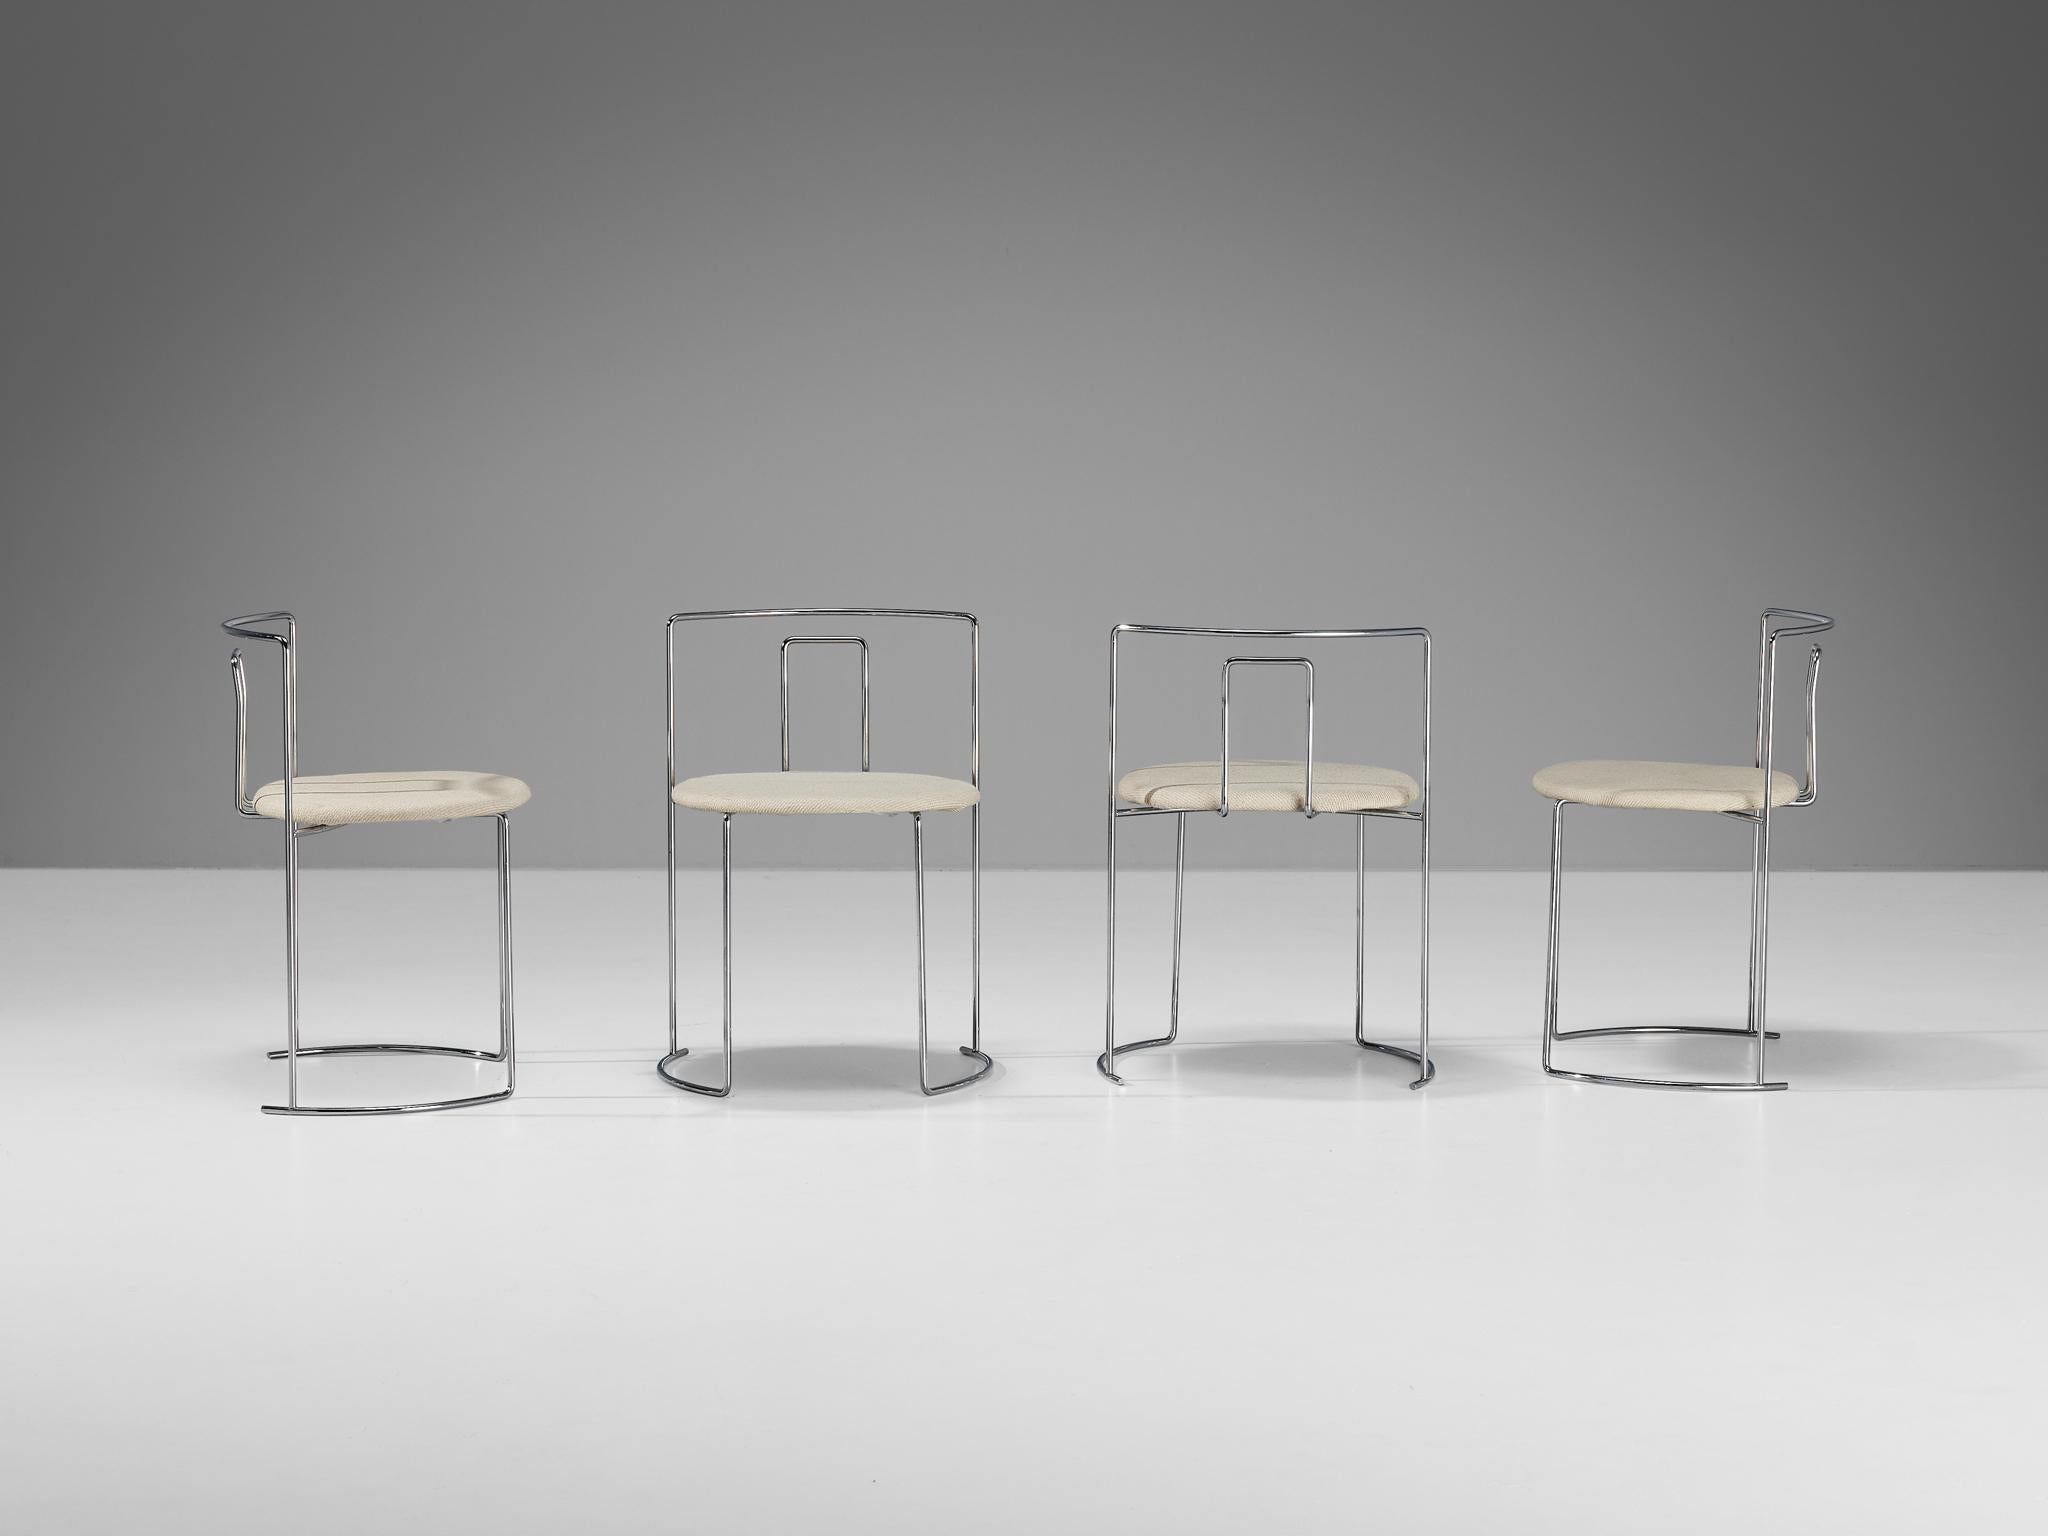 Kazuhide Takahama for Simon Gavina, set of four 'Gaja' chairs, chromed metal, fabric, Italy, design 1979

Set of four beautiful and delicate dining chairs designed by Kazuhide Takahama in 1979. The frames of these chairs are elegant and subtle, due